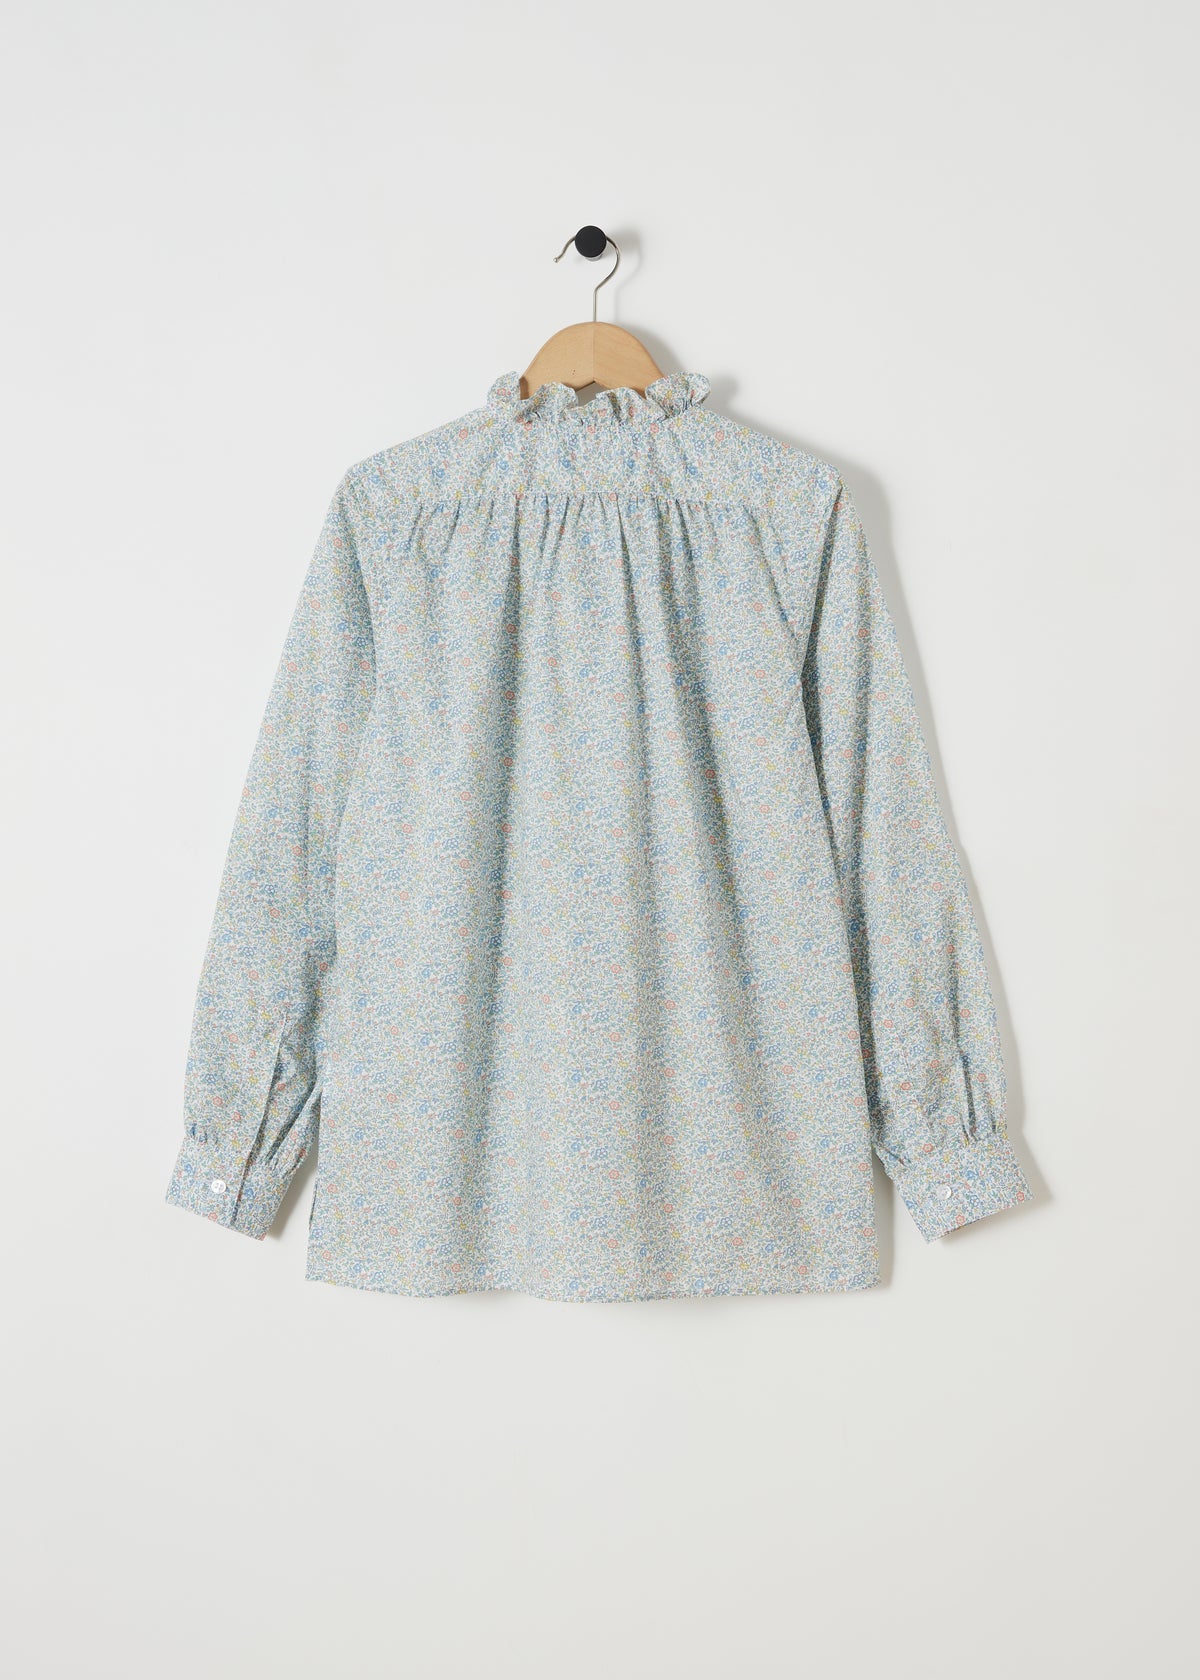 ALMA SHIRT — Made with Katie & Millie Tana Lawn Blue™